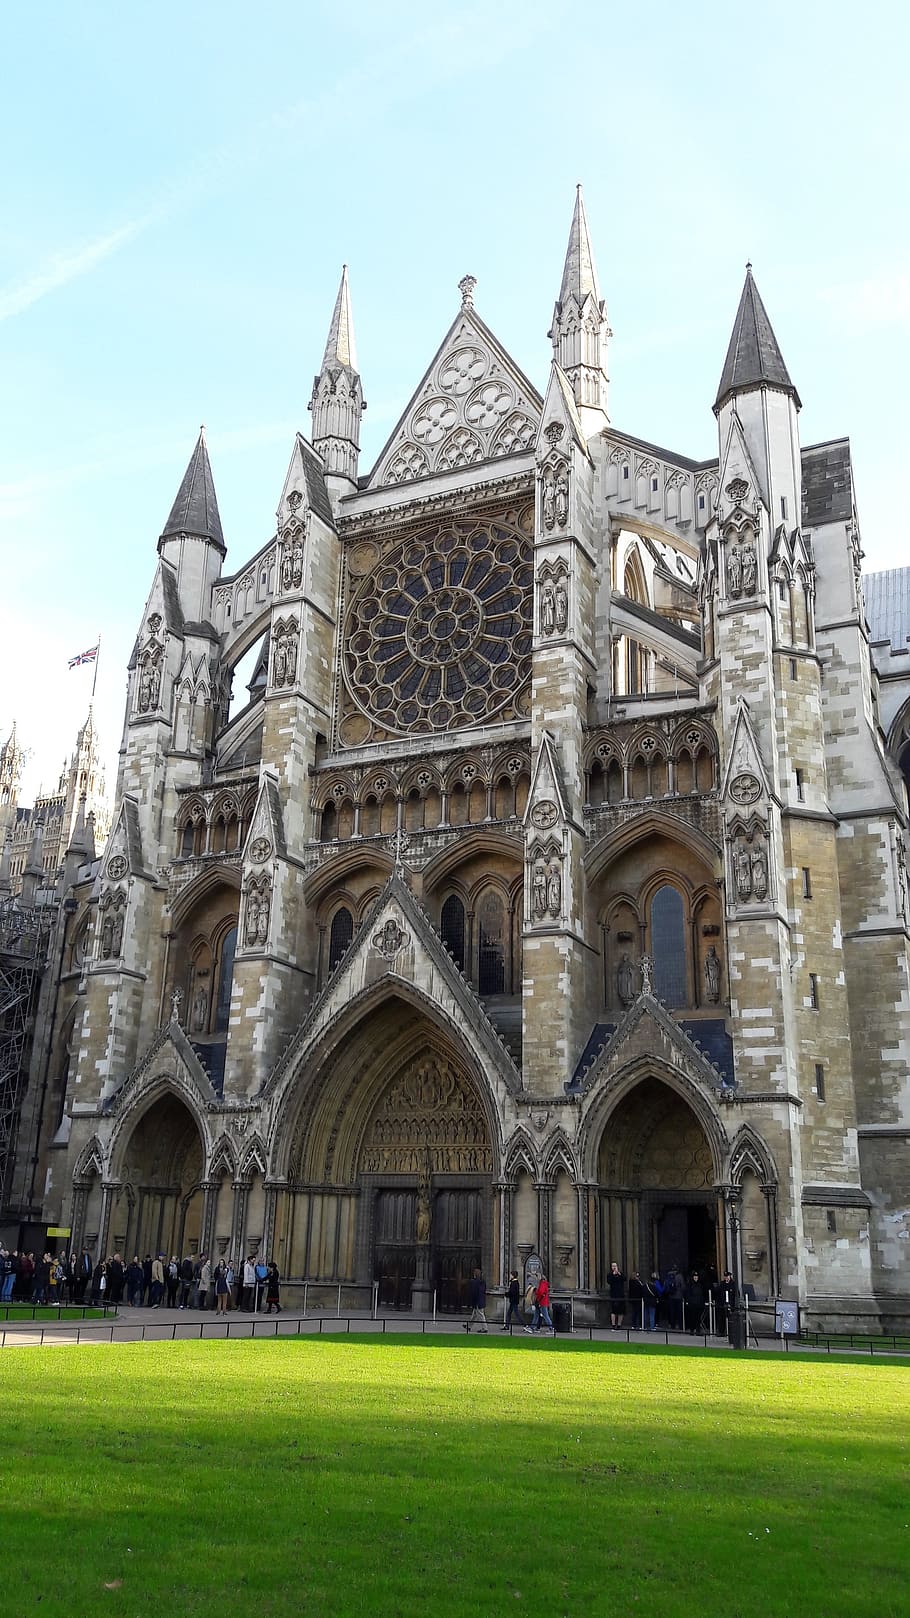 westminster abbey, london, sightseeing, cathedral, england, architecture, built structure, building exterior, building, grass